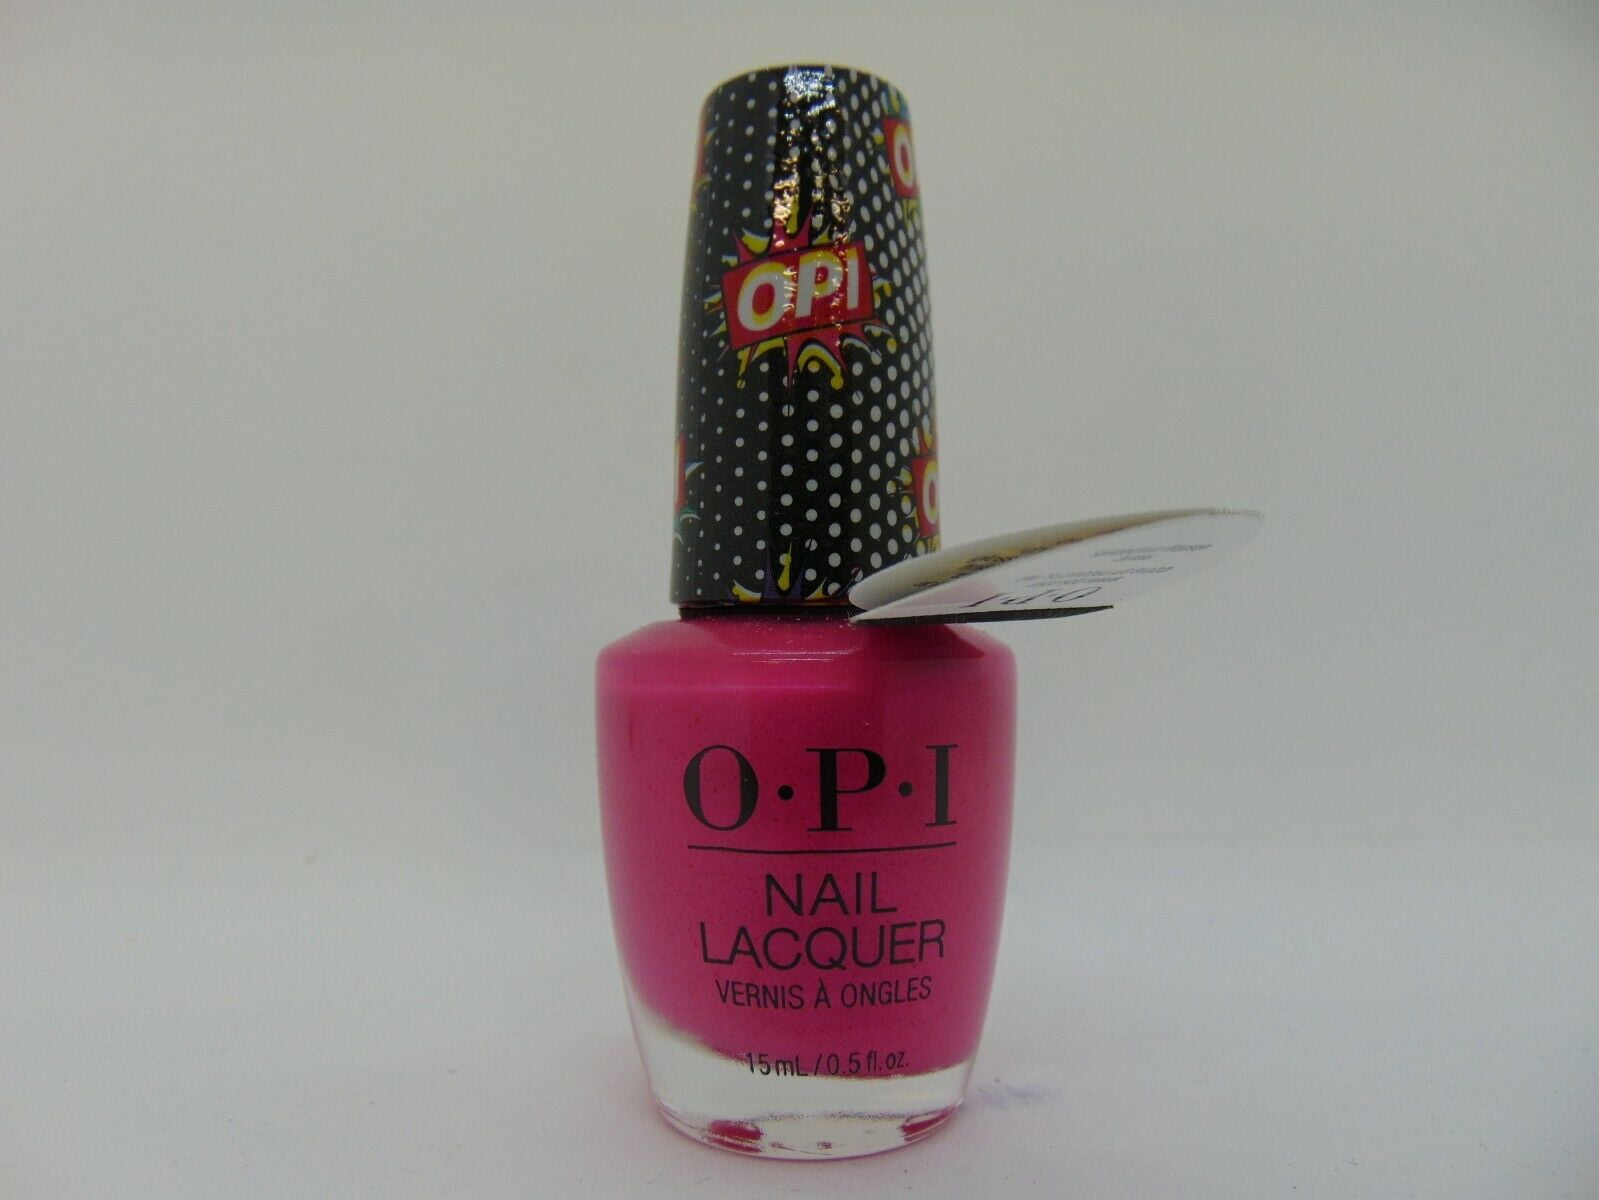 2. OPI Nail Lacquer in "Mod About You" - wide 5